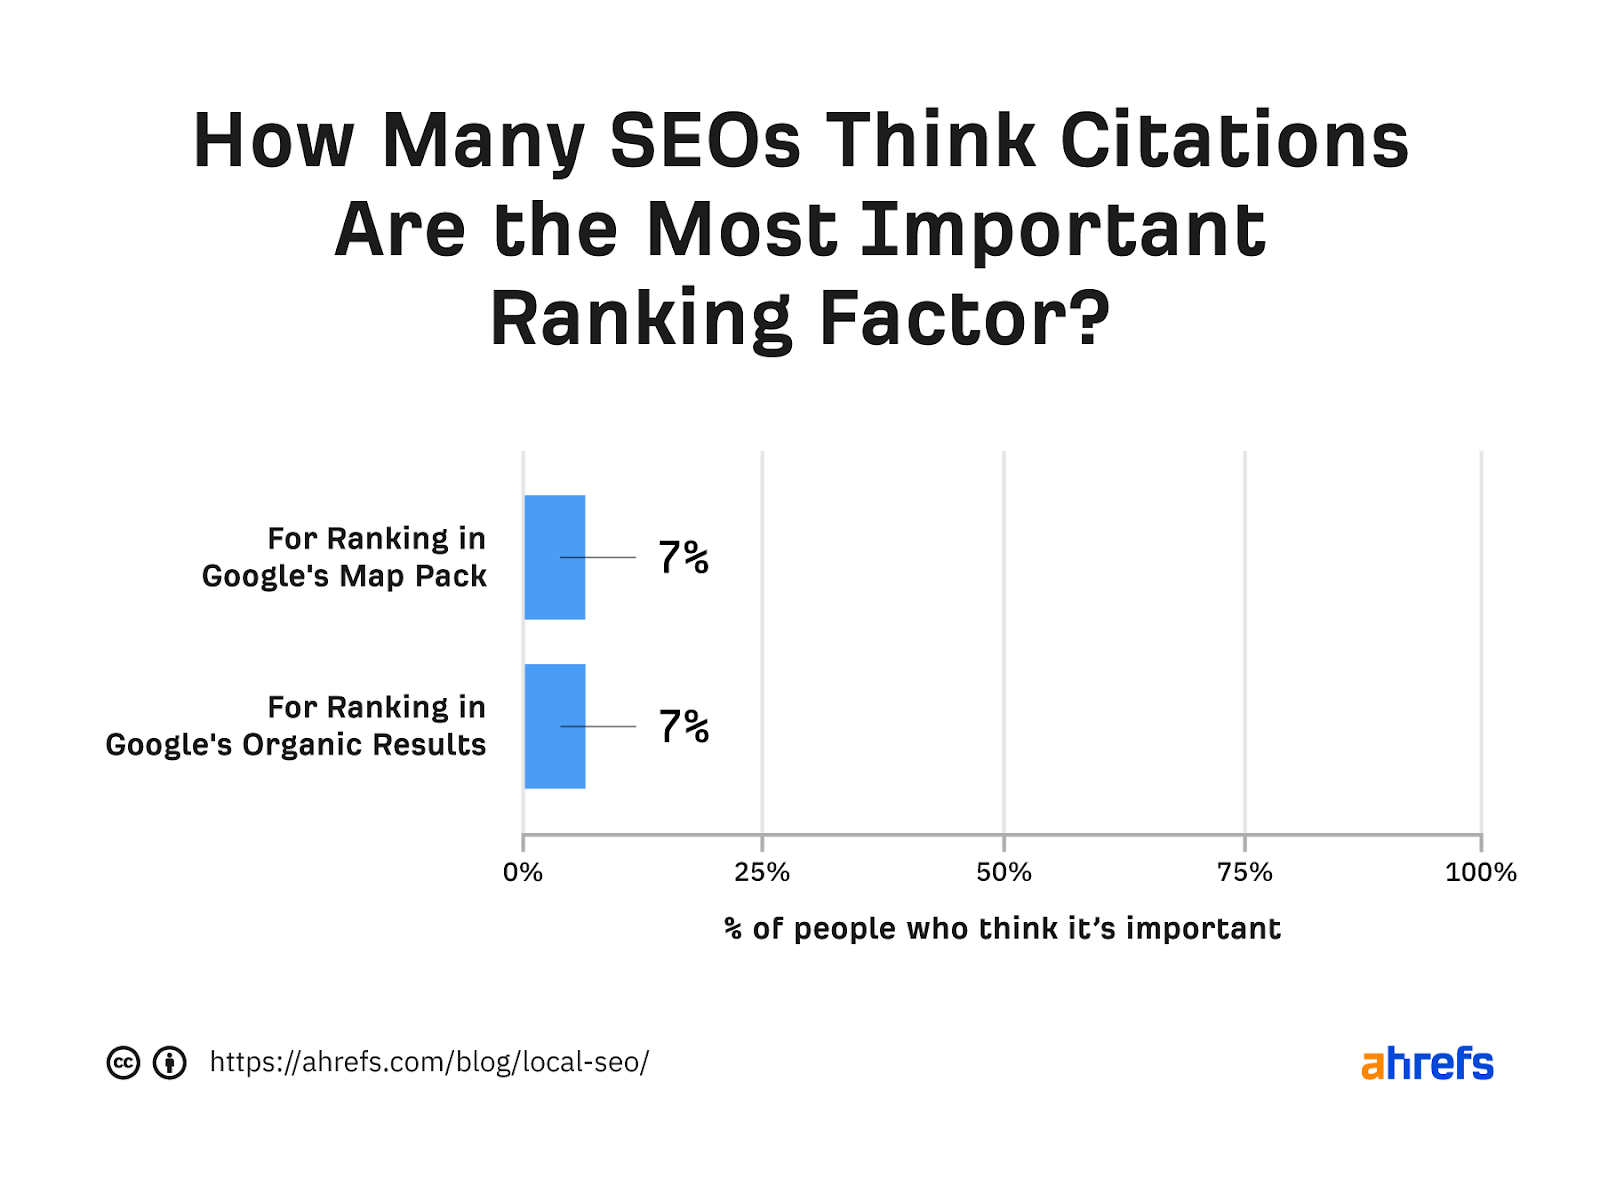 Bar graph showing percentage of SEOs who think citations are most important ranking factor for "map pack" and "regular" results, respectively 